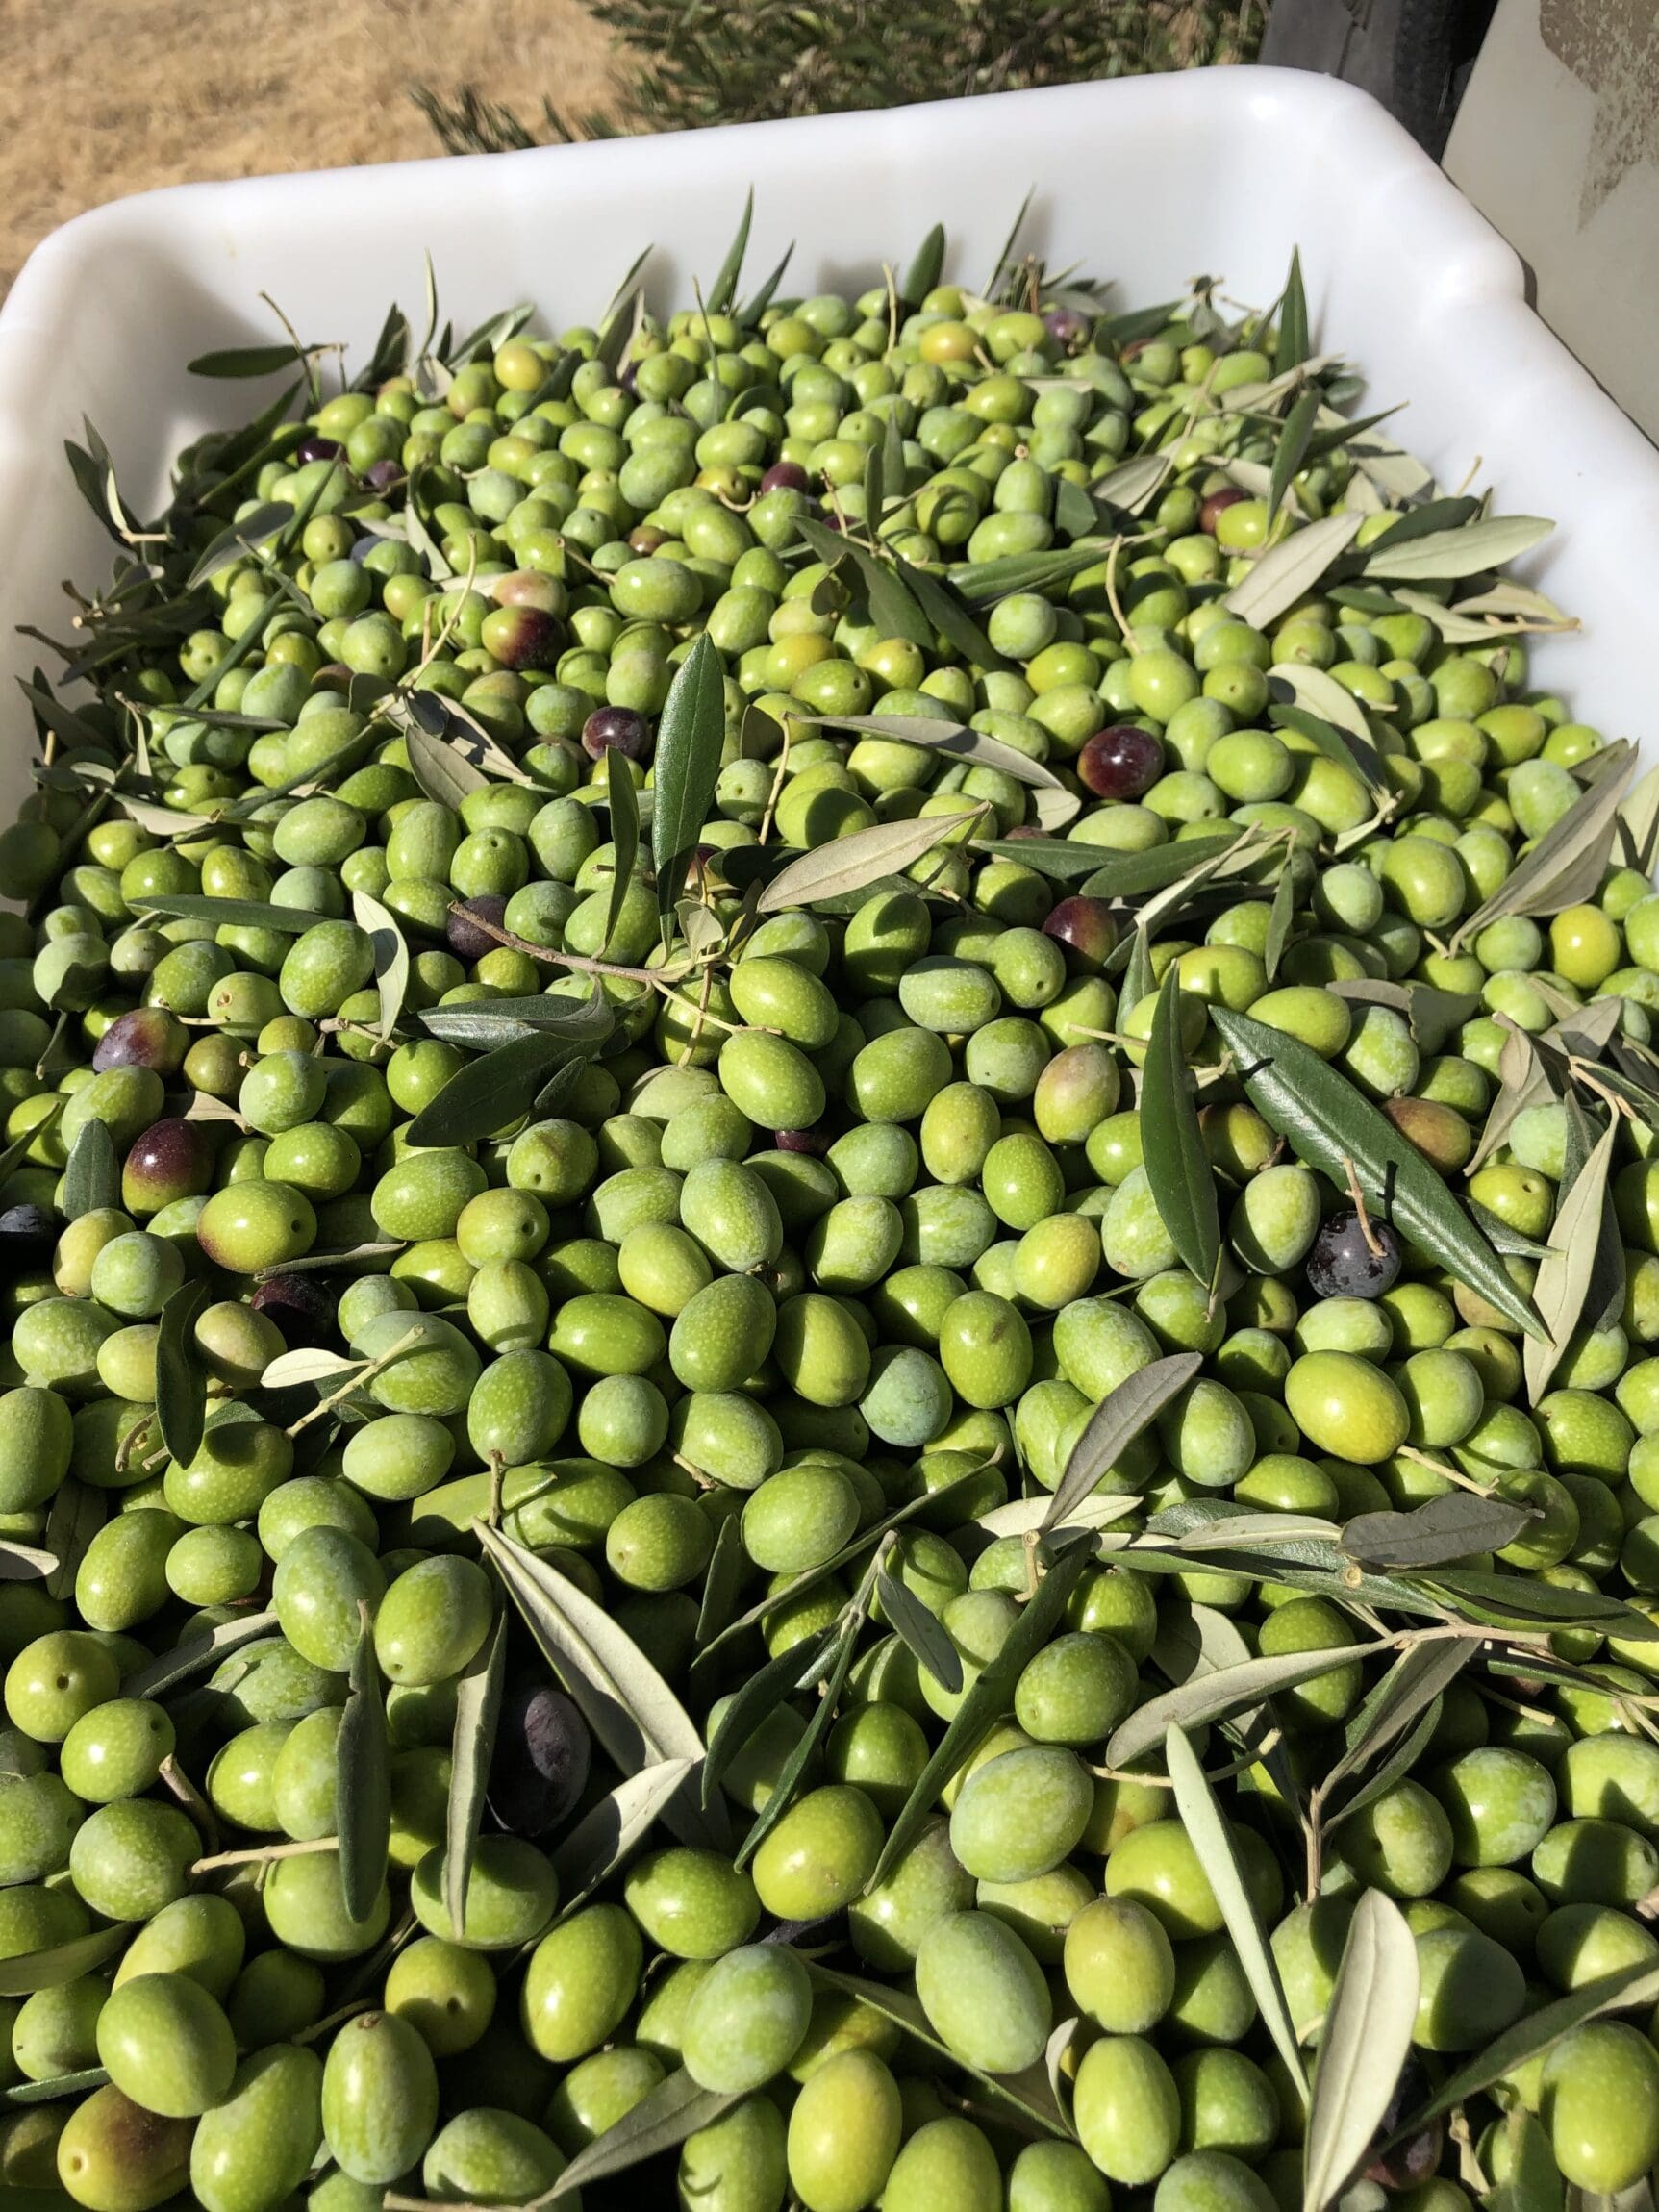 Guide to Paso Robles | A tub of olives from San Miguel Olive Farm